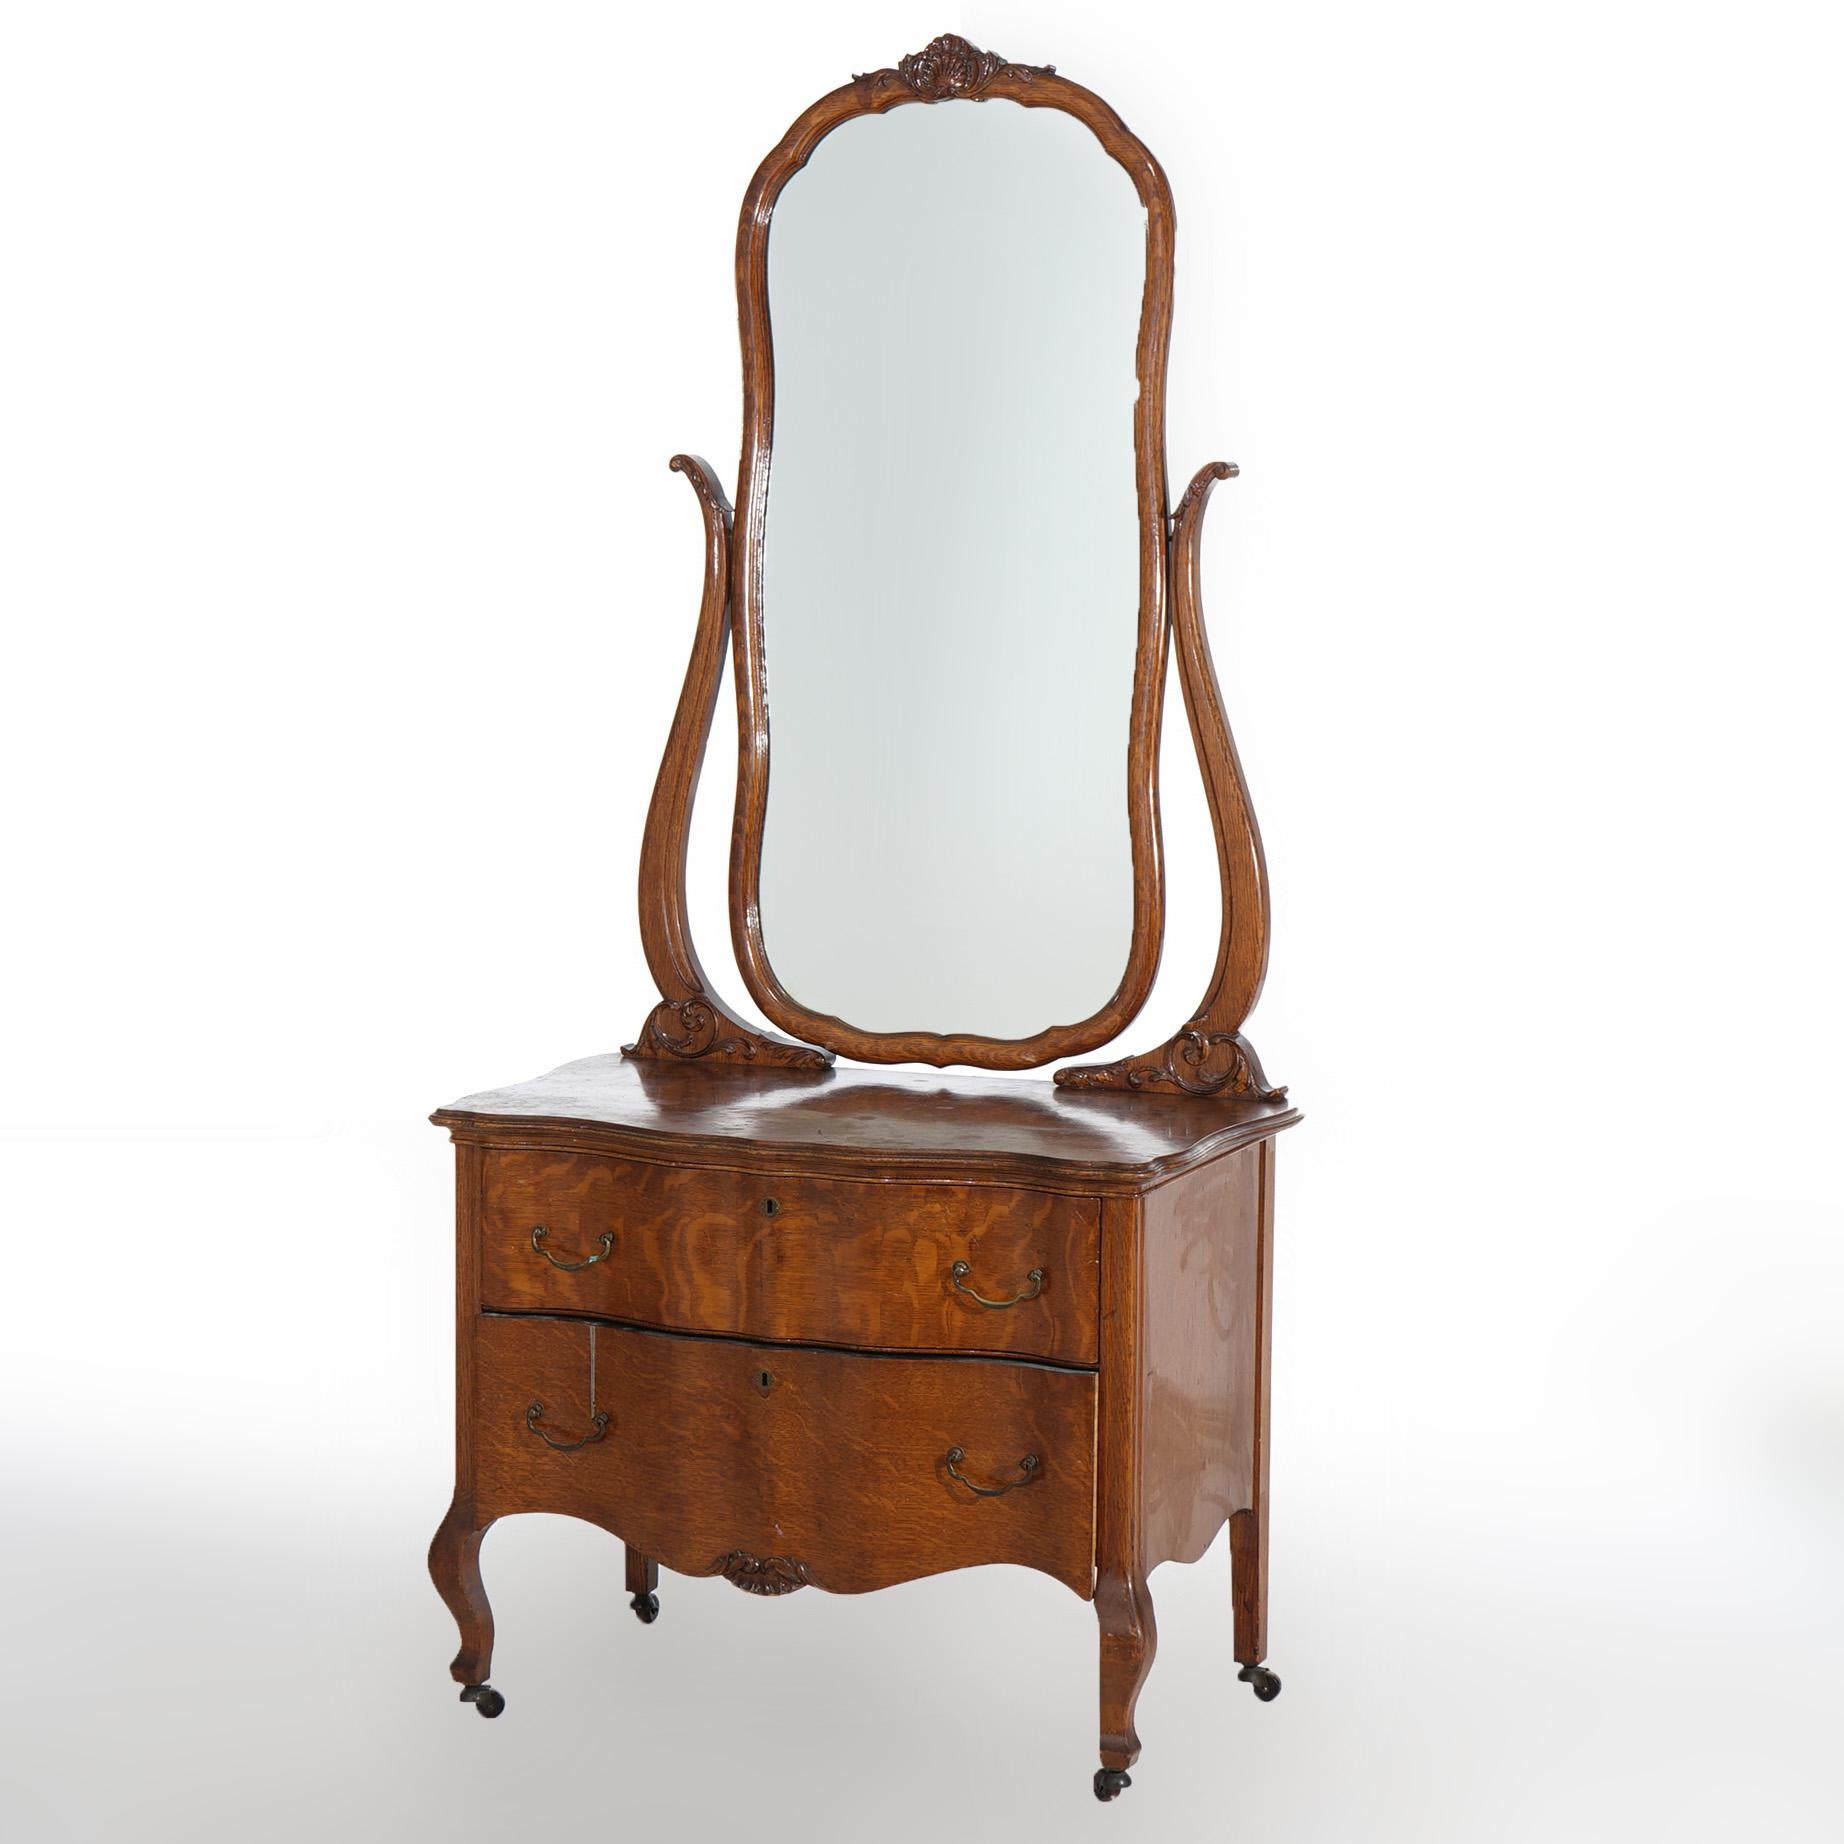 ***Ask About Reduced In-House Shipping Rates - Reliable Service & Fully Insured***
An antique princess dresser after RJ Horner offers oak construction with shaped dressing mirror over serpentine two drawer chest, c1920

Measures - Overall 69.5